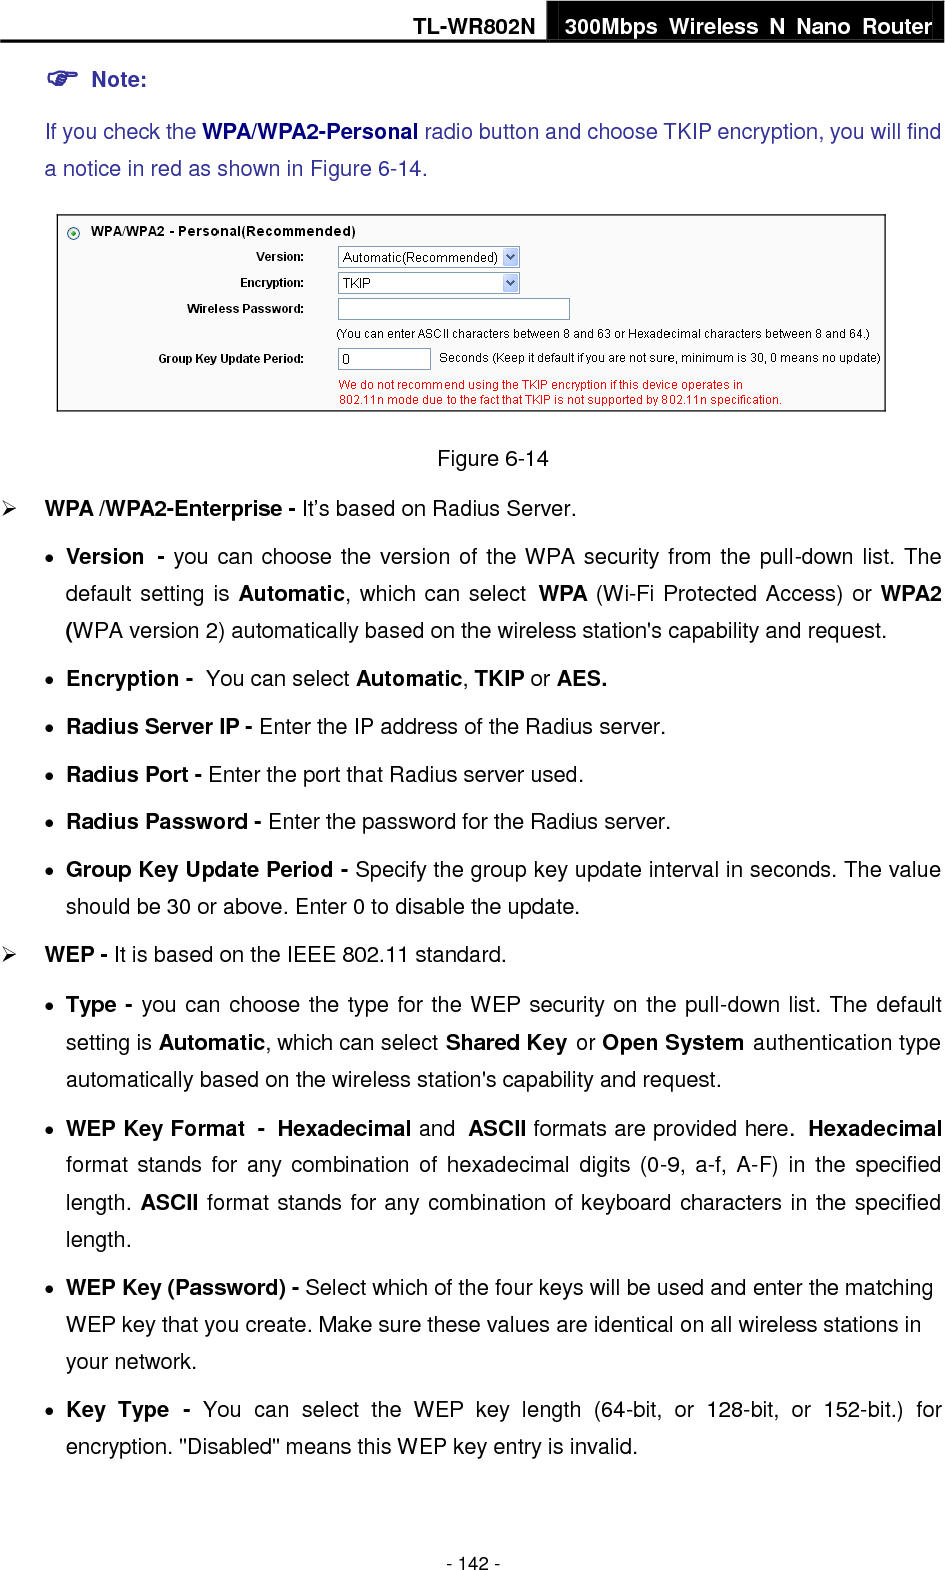 TL-WR802N 300Mbps  Wireless  N  Nano  Router  - 142 -  Note:   If you check the WPA/WPA2-Personal radio button and choose TKIP encryption, you will find a notice in red as shown in Figure 6-14.  Figure 6-14  WPA /WPA2-Enterprise - It’s based on Radius Server.  Version - you can choose the version of the WPA security from the pull-down list. The default setting is Automatic, which can select WPA (Wi-Fi Protected Access) or WPA2 (WPA version 2) automatically based on the wireless station&apos;s capability and request.  Encryption - You can select Automatic, TKIP or AES.  Radius Server IP - Enter the IP address of the Radius server.  Radius Port - Enter the port that Radius server used.  Radius Password - Enter the password for the Radius server.  Group Key Update Period - Specify the group key update interval in seconds. The value should be 30 or above. Enter 0 to disable the update.  WEP - It is based on the IEEE 802.11 standard.    Type - you can choose the type for the WEP security on the pull-down list. The default setting is Automatic, which can select Shared Key or Open System authentication type automatically based on the wireless station&apos;s capability and request.  WEP Key Format - Hexadecimal and ASCII formats are provided here. Hexadecimal format stands  for any  combination of  hexadecimal digits  (0-9, a-f,  A-F)  in  the specified length. ASCII format stands for any combination of keyboard characters in the specified length.    WEP Key (Password) - Select which of the four keys will be used and enter the matching WEP key that you create. Make sure these values are identical on all wireless stations in your network.    Key  Type -  You  can  select  the  WEP  key  length  (64-bit,  or  128-bit,  or  152-bit.)  for encryption. &quot;Disabled&quot; means this WEP key entry is invalid. 